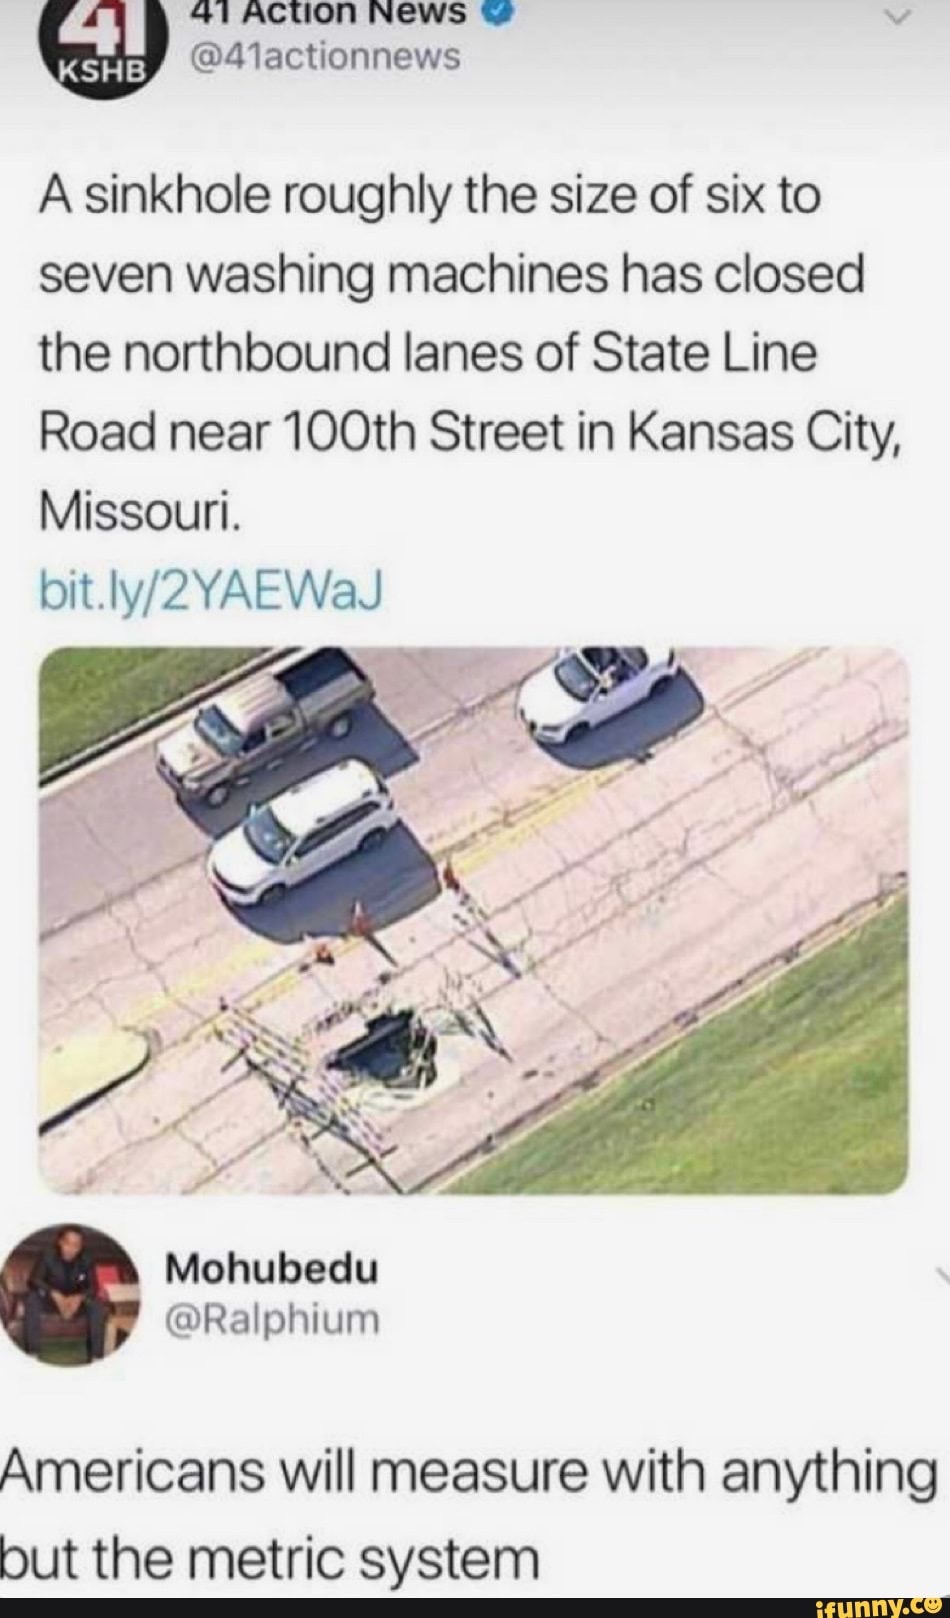 sinkhole roughly the size of six - 41 Action News Kshb A sinkhole roughly the size of six to seven washing machines has closed the northbound lanes of State Line Road near 100th Street in Kansas City, Missouri. bit.ly2YAEWaj Mohubedu Americans will measur